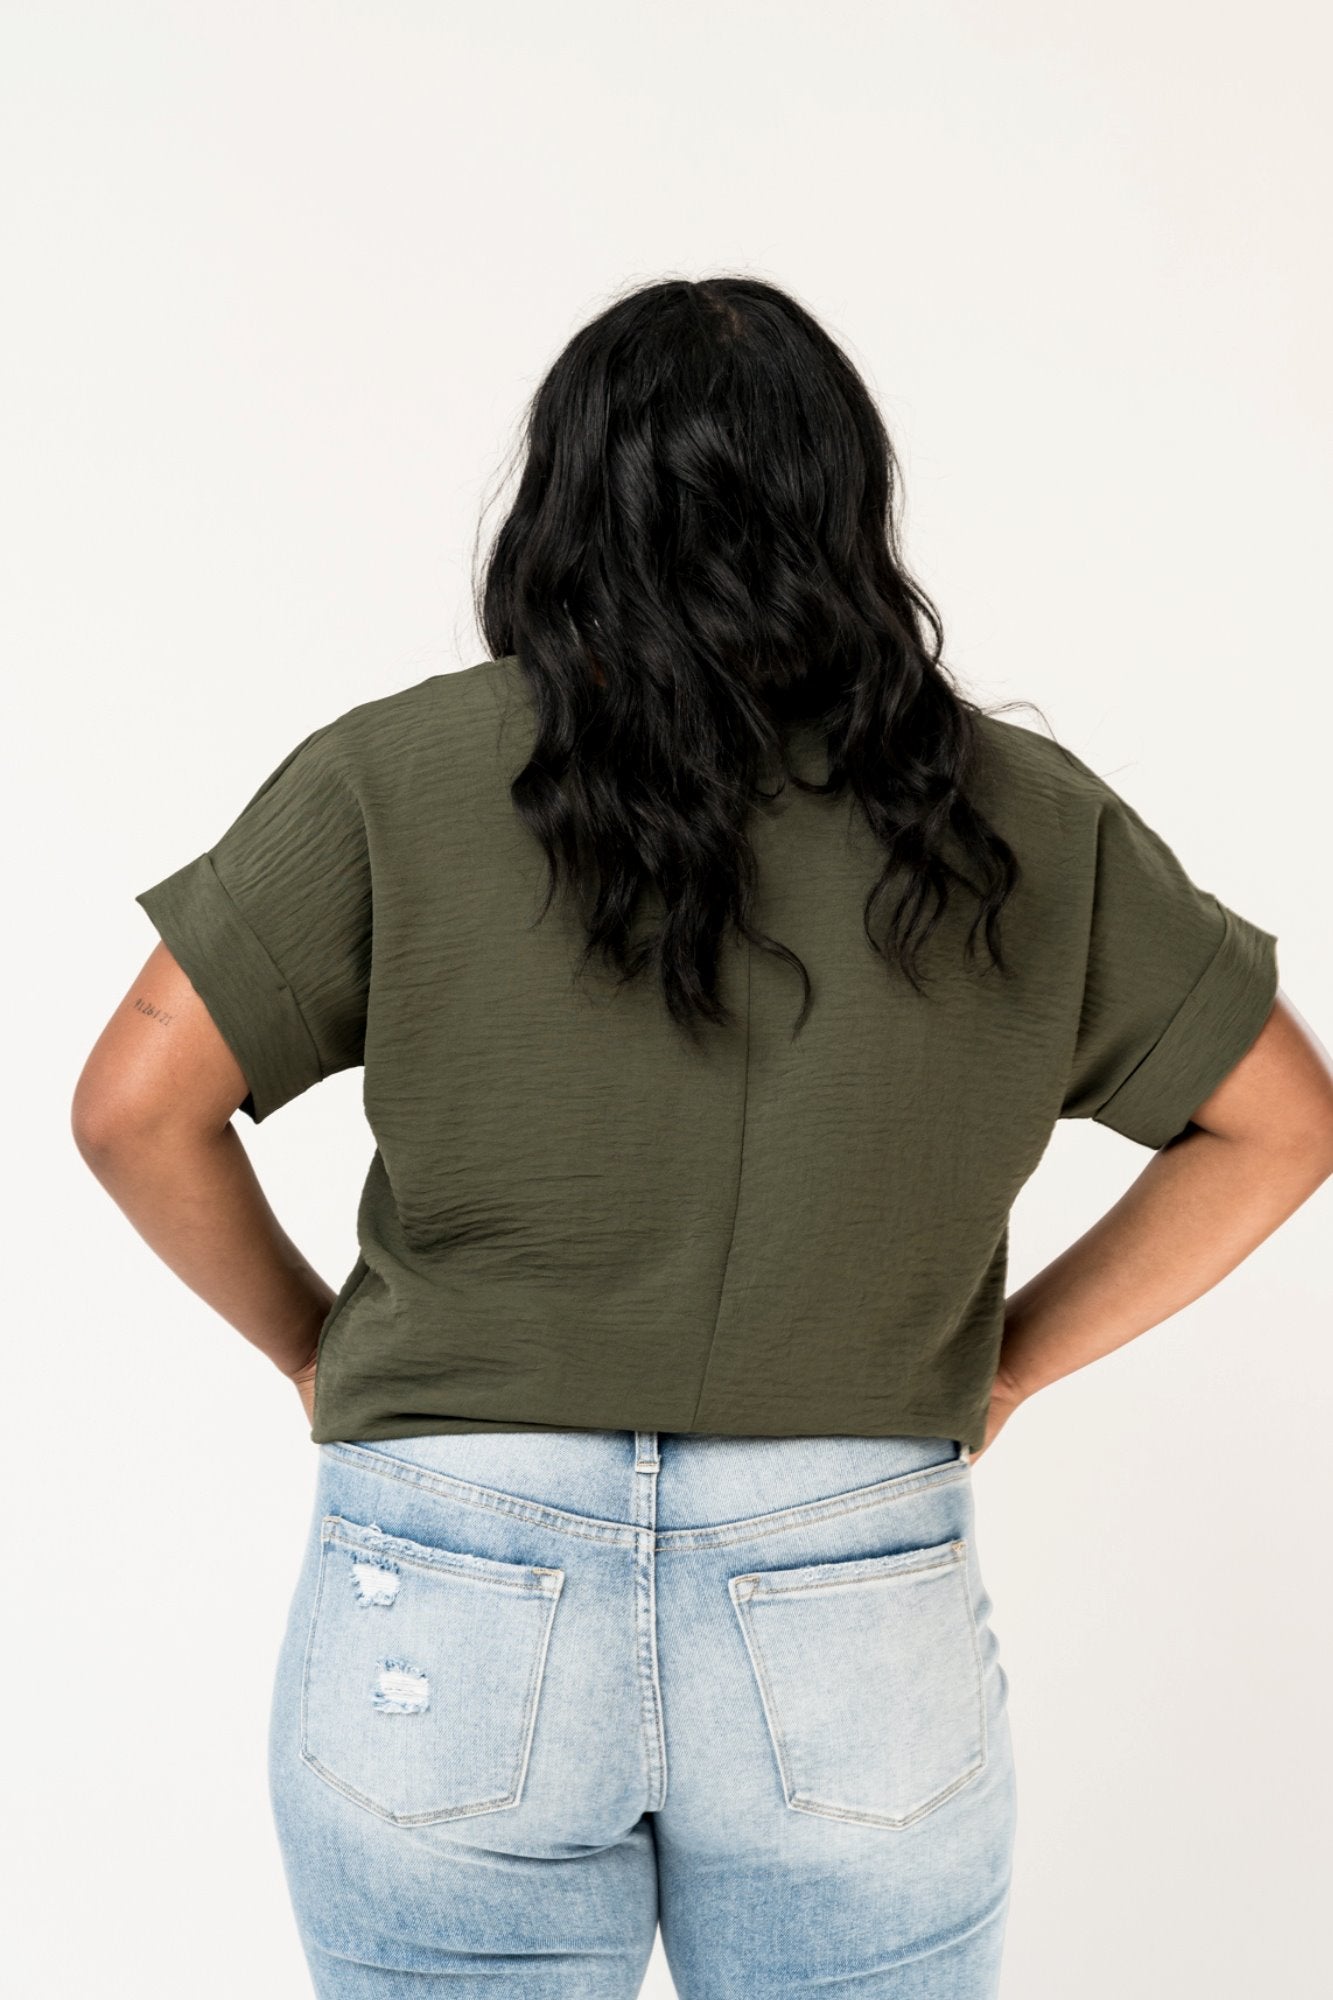 Ella Blouse in Olive Holley Girl 